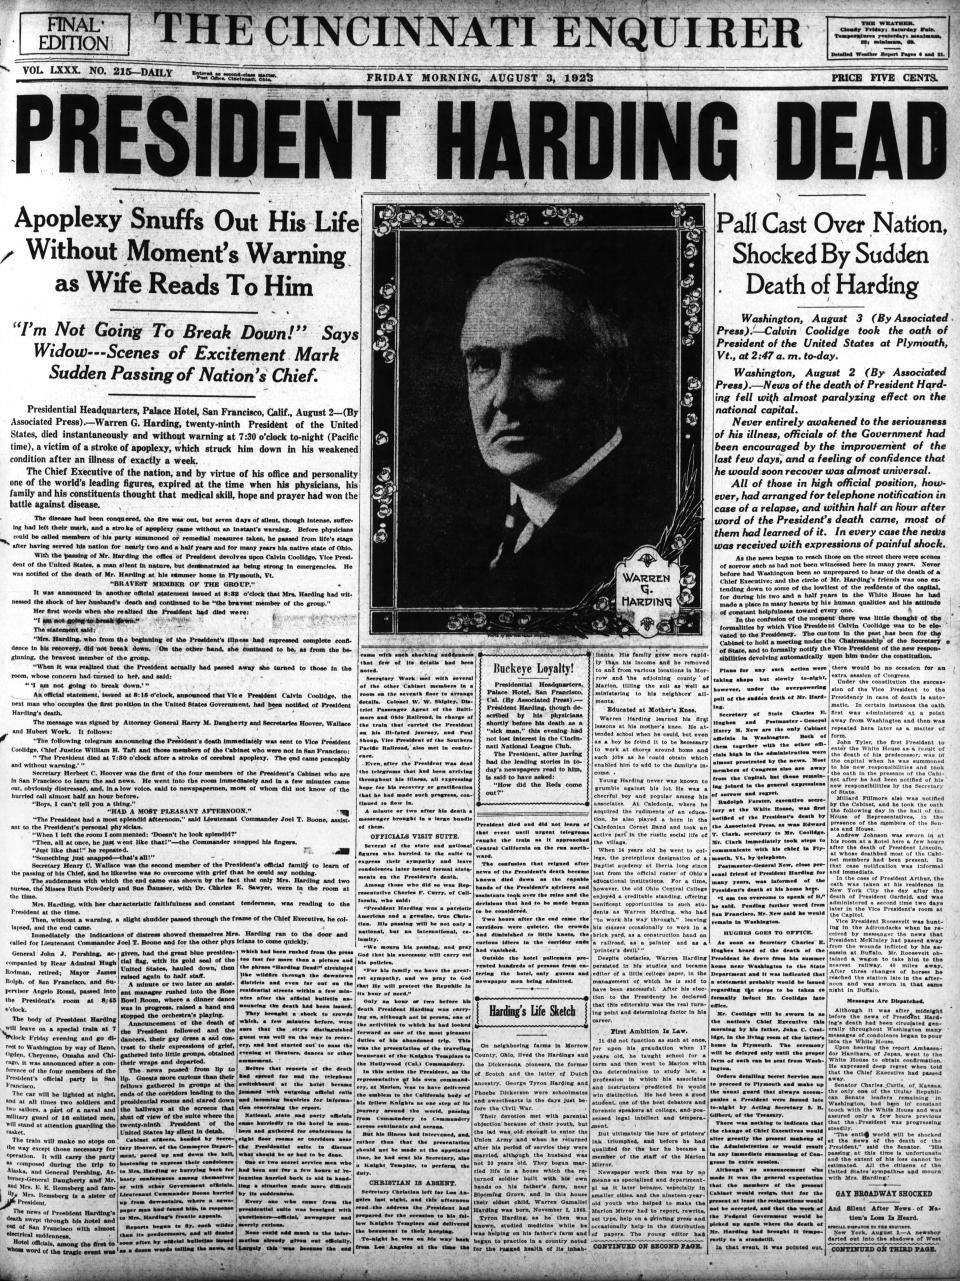 The Cincinnati Enquirer front page from Aug. 3, 1923. President Warren G. Harding died.